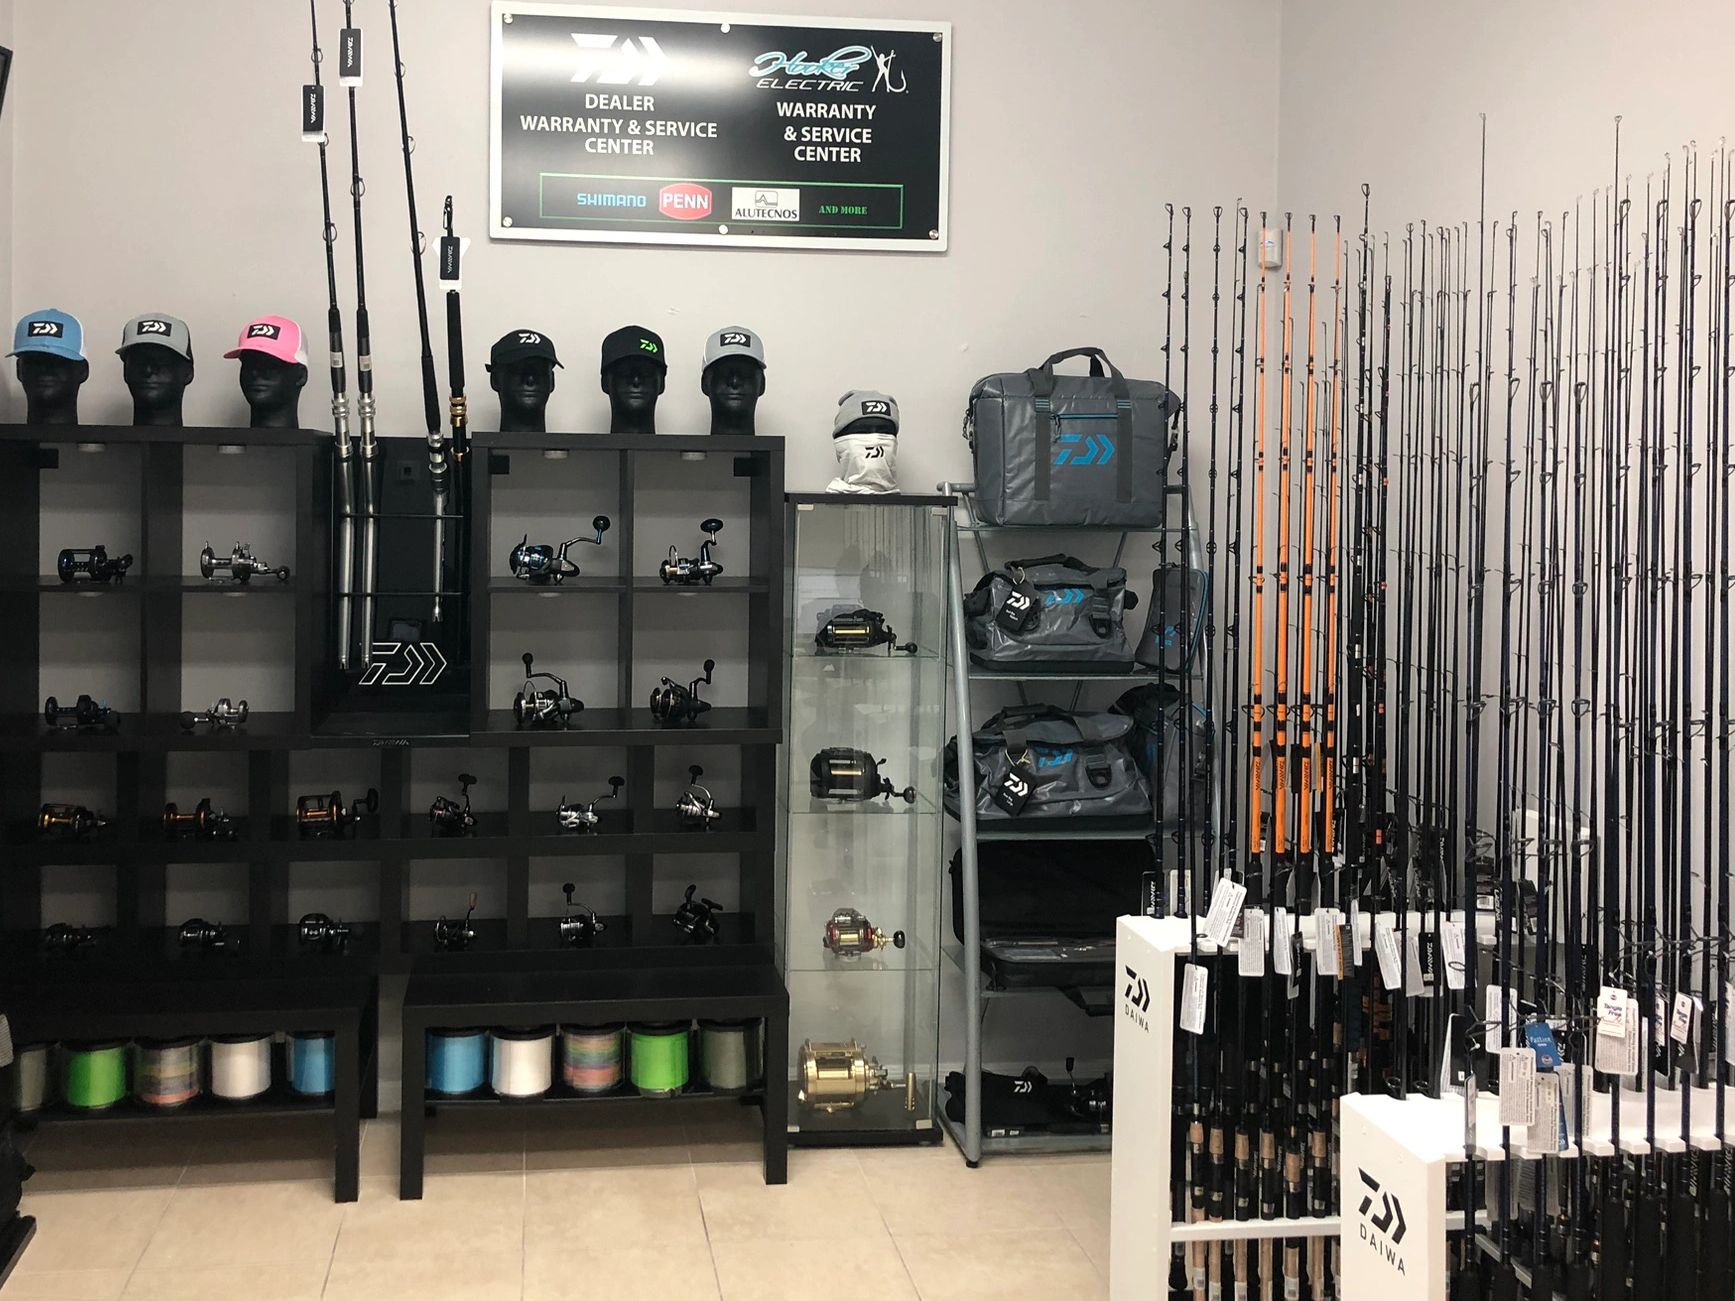 Reel and Rod Services INC - Daiwa Repair Center, Penn Repair Center,  Electric Reel Repair, Daiwa Repair Center